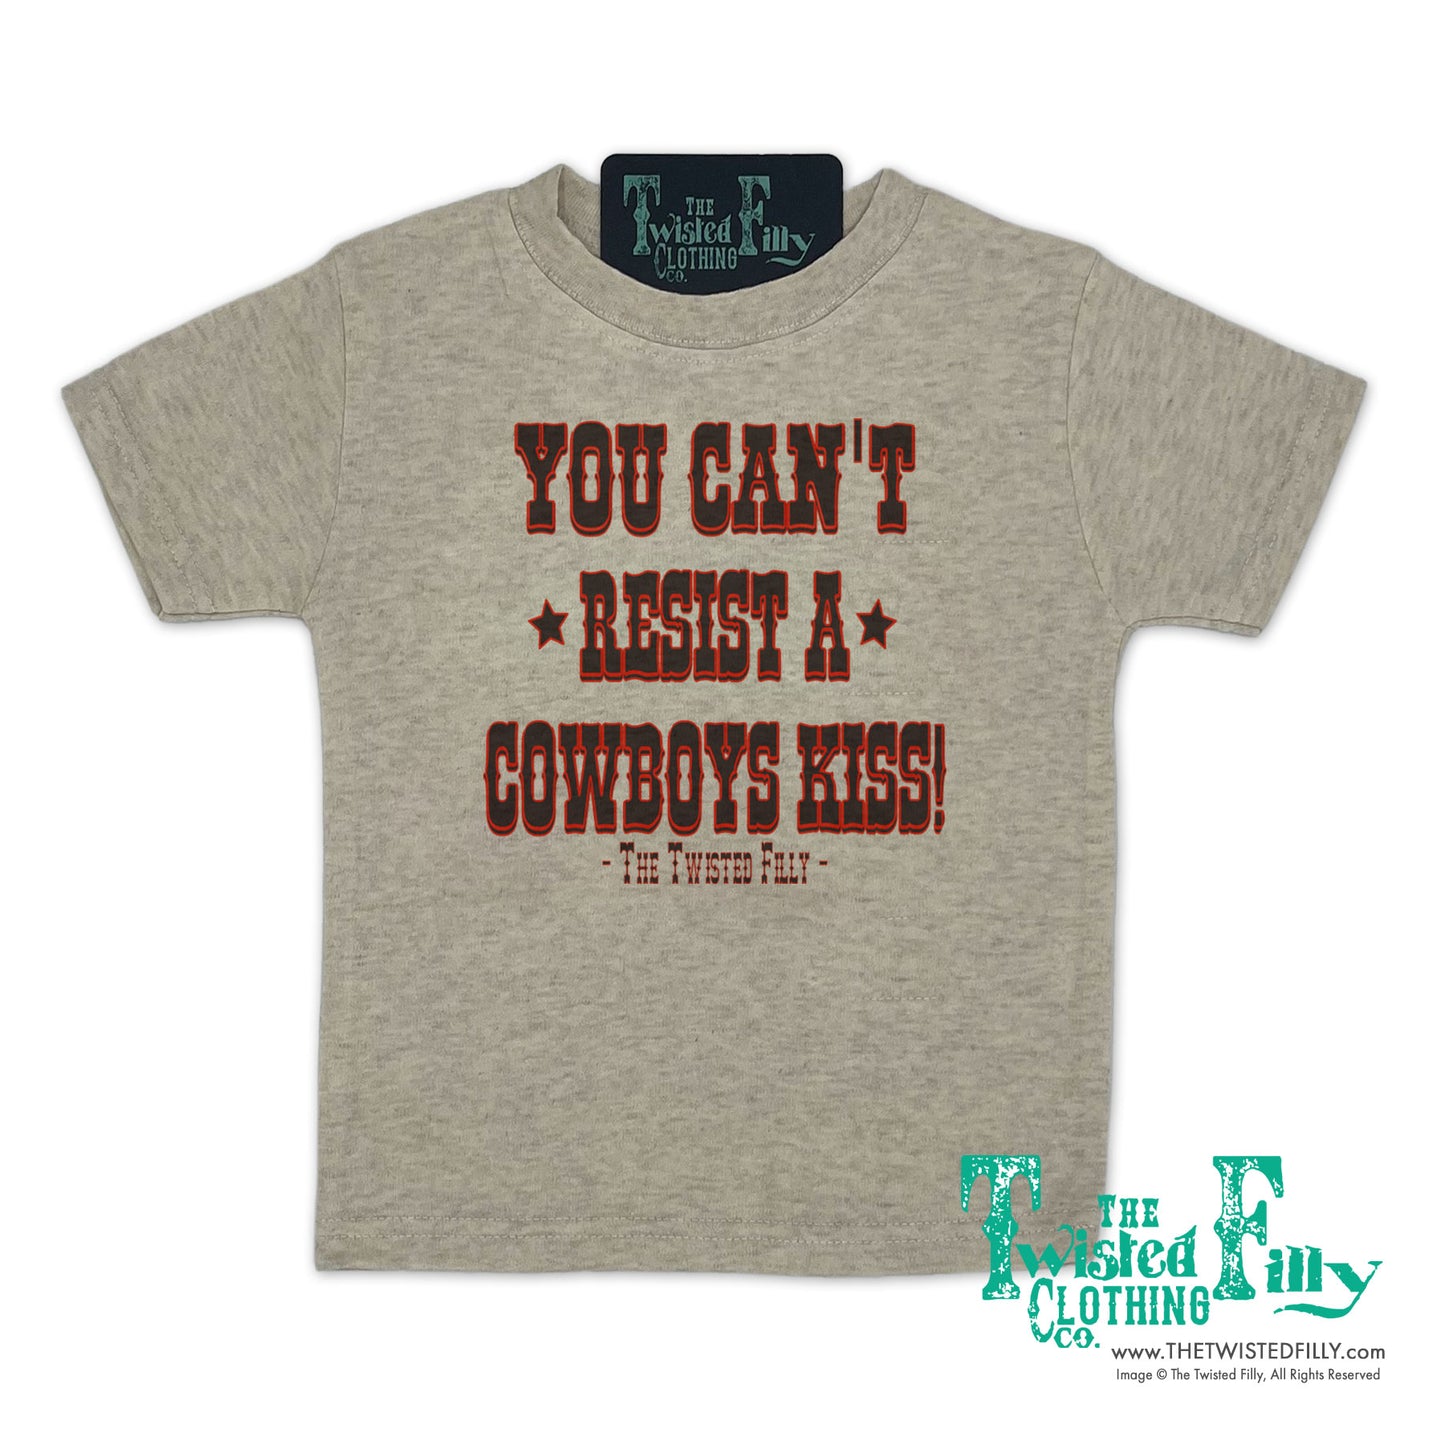 You Can't Resist A Cowboys Kiss - S/S Youth Tee - Oatmeal